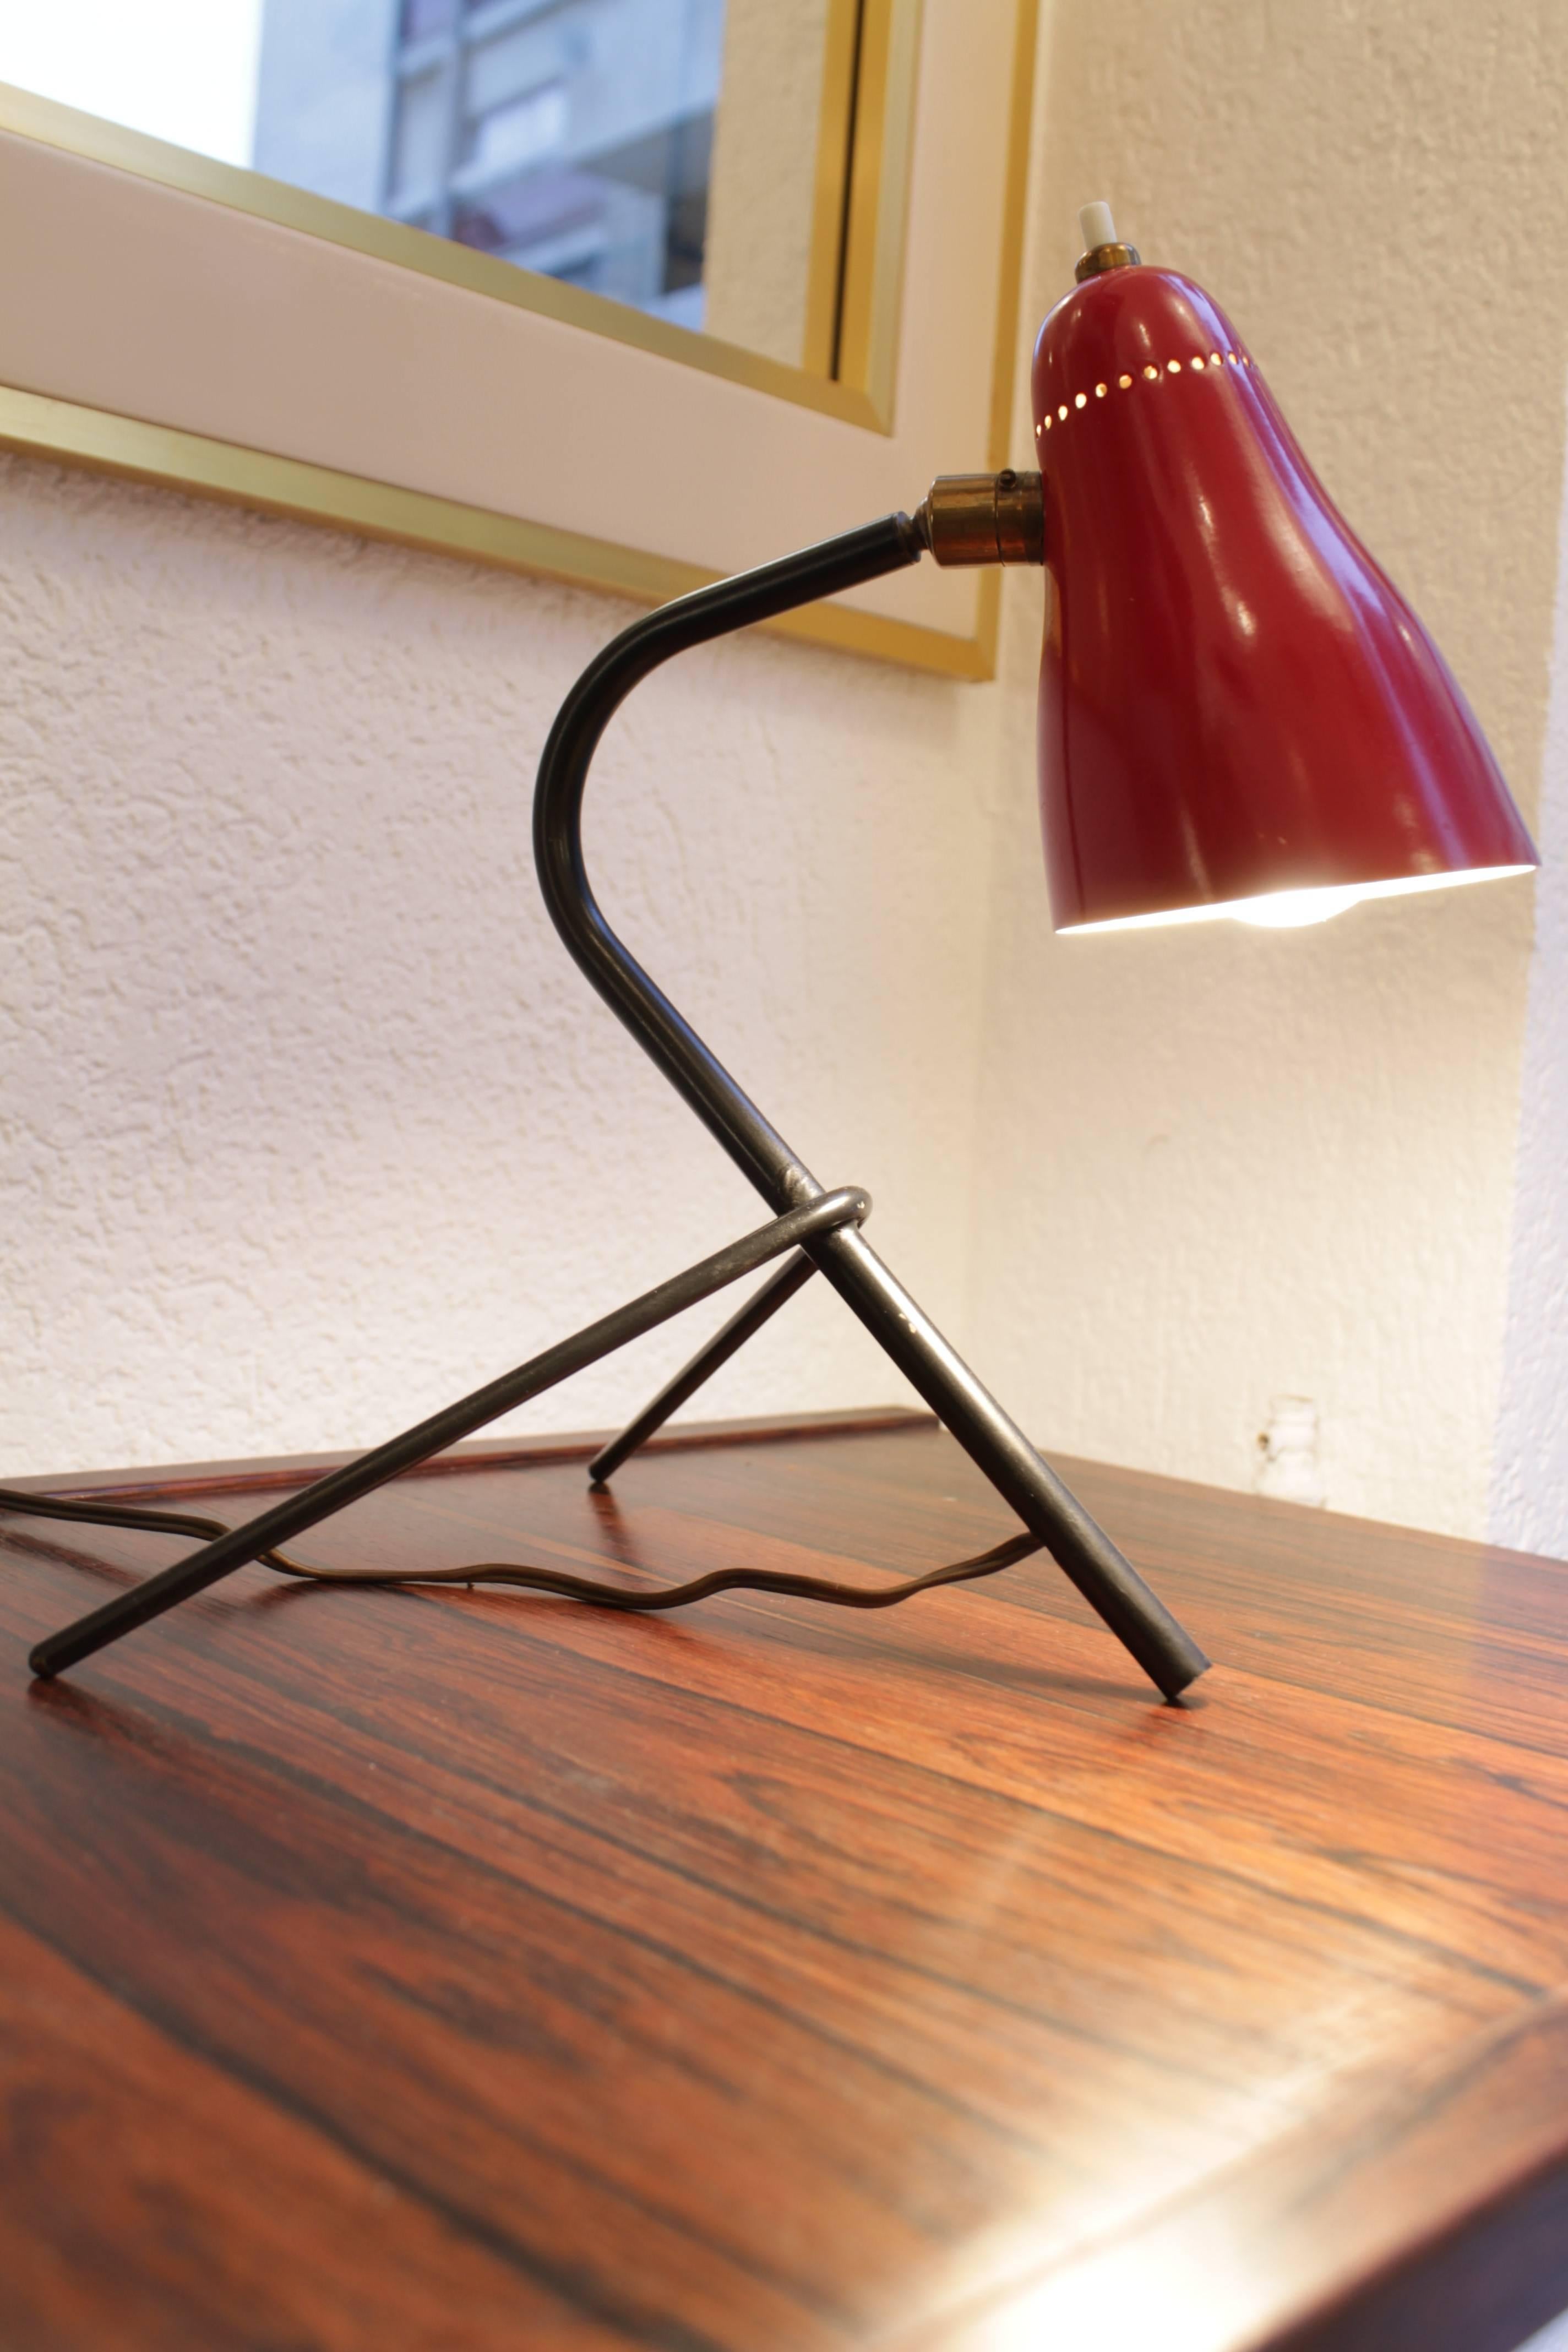 Tripod table lamp by Giuseppe Ostuni for O-Luce, Italy, circa 1950
Rare example with black base, painted metal and brass
Perfect condition.